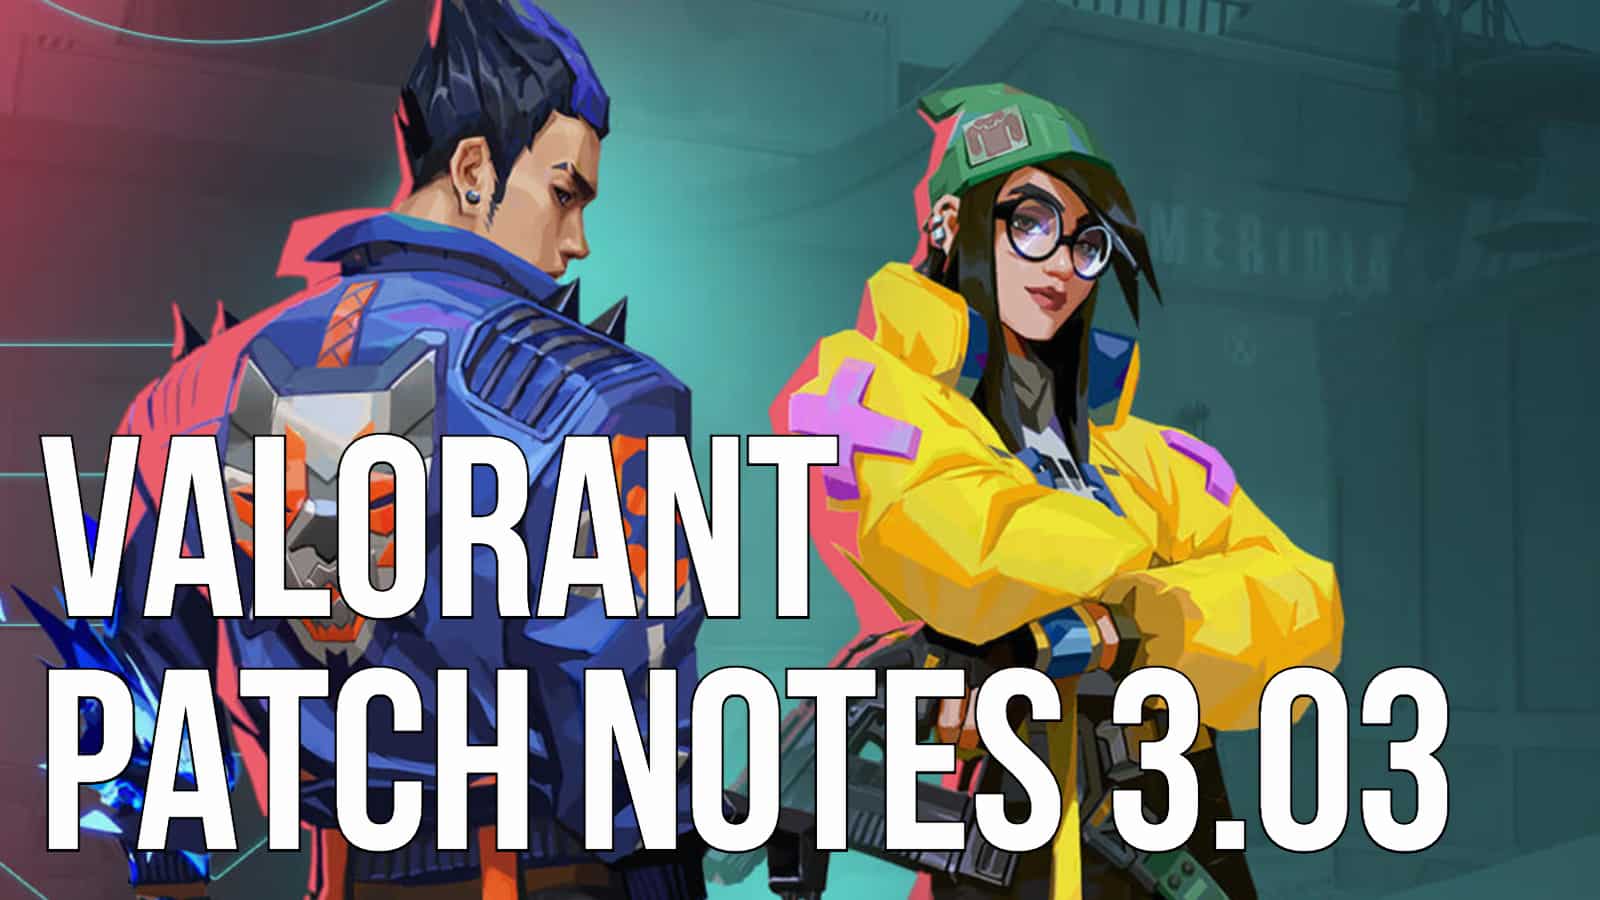 Valorant dev explains extra Yoru buff missing from 2.06 patch notes